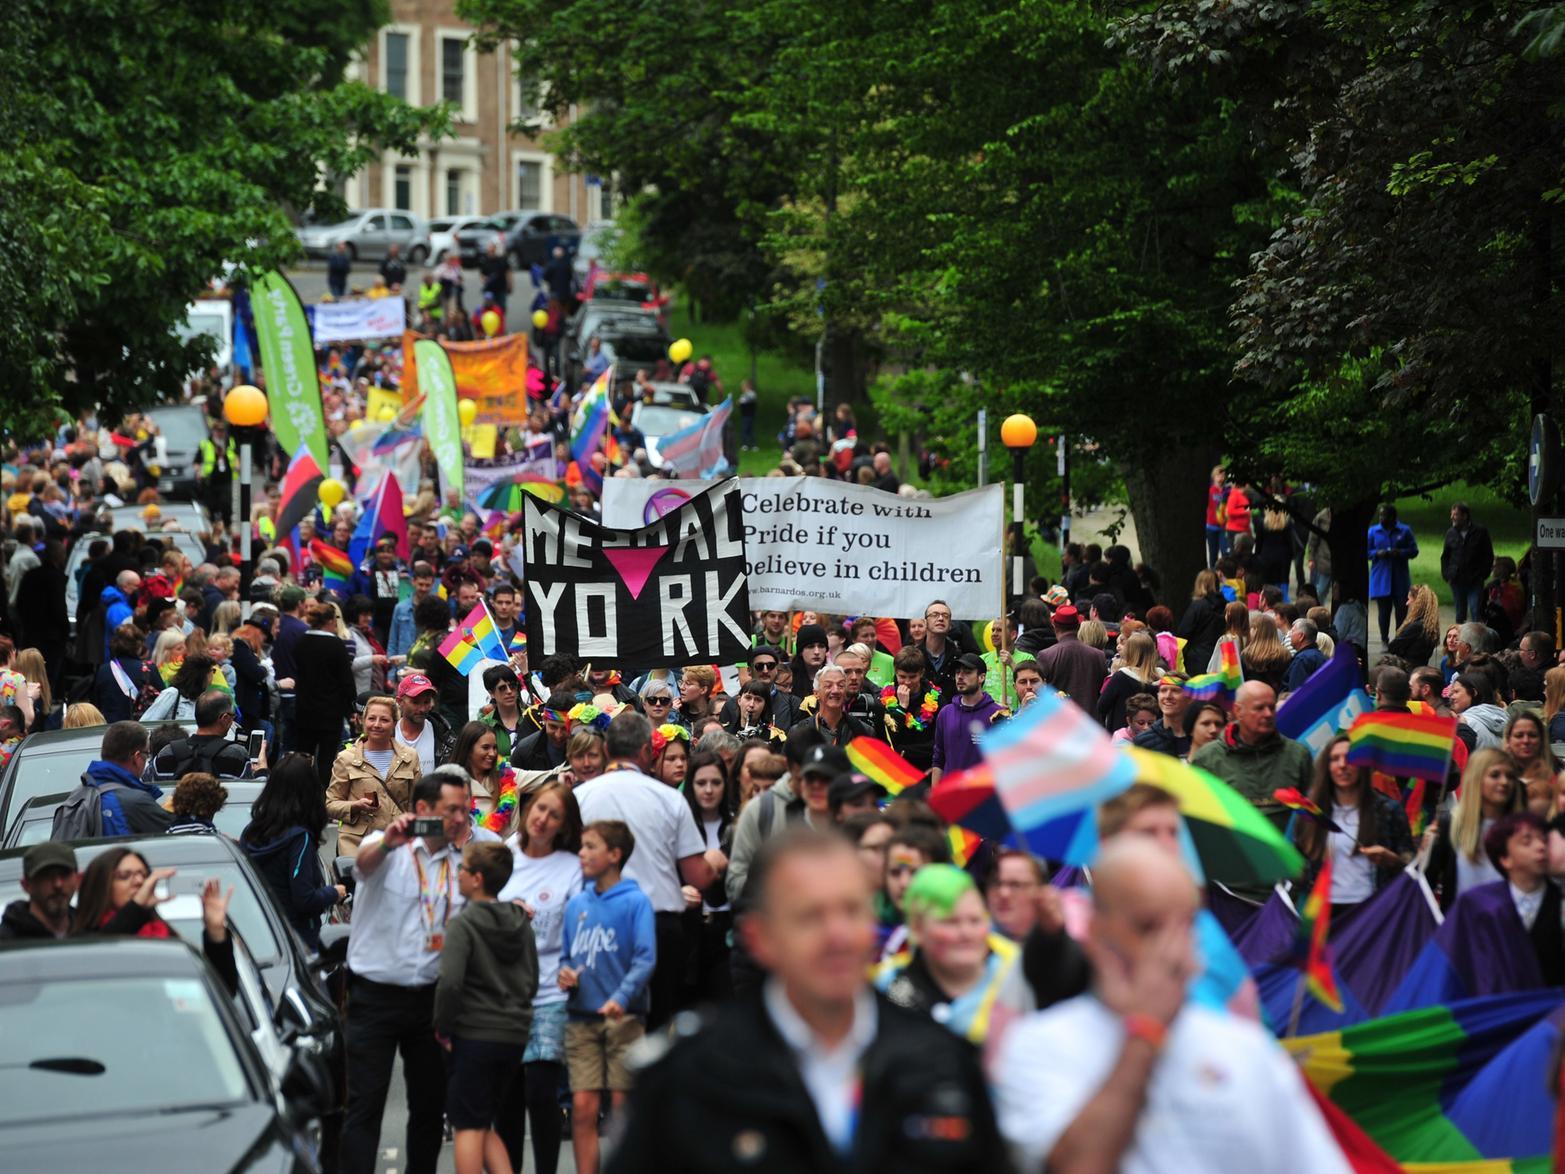 In 2017, Harrogate got its very own Pride in Diversity Festival, to rival the big cities like Leeds and Manchester. The festival has now enjoyed three events and has grown year-on-year, with a glorious and colourful parade through the centre of town and lots of activities on offer at Valley Gardens.